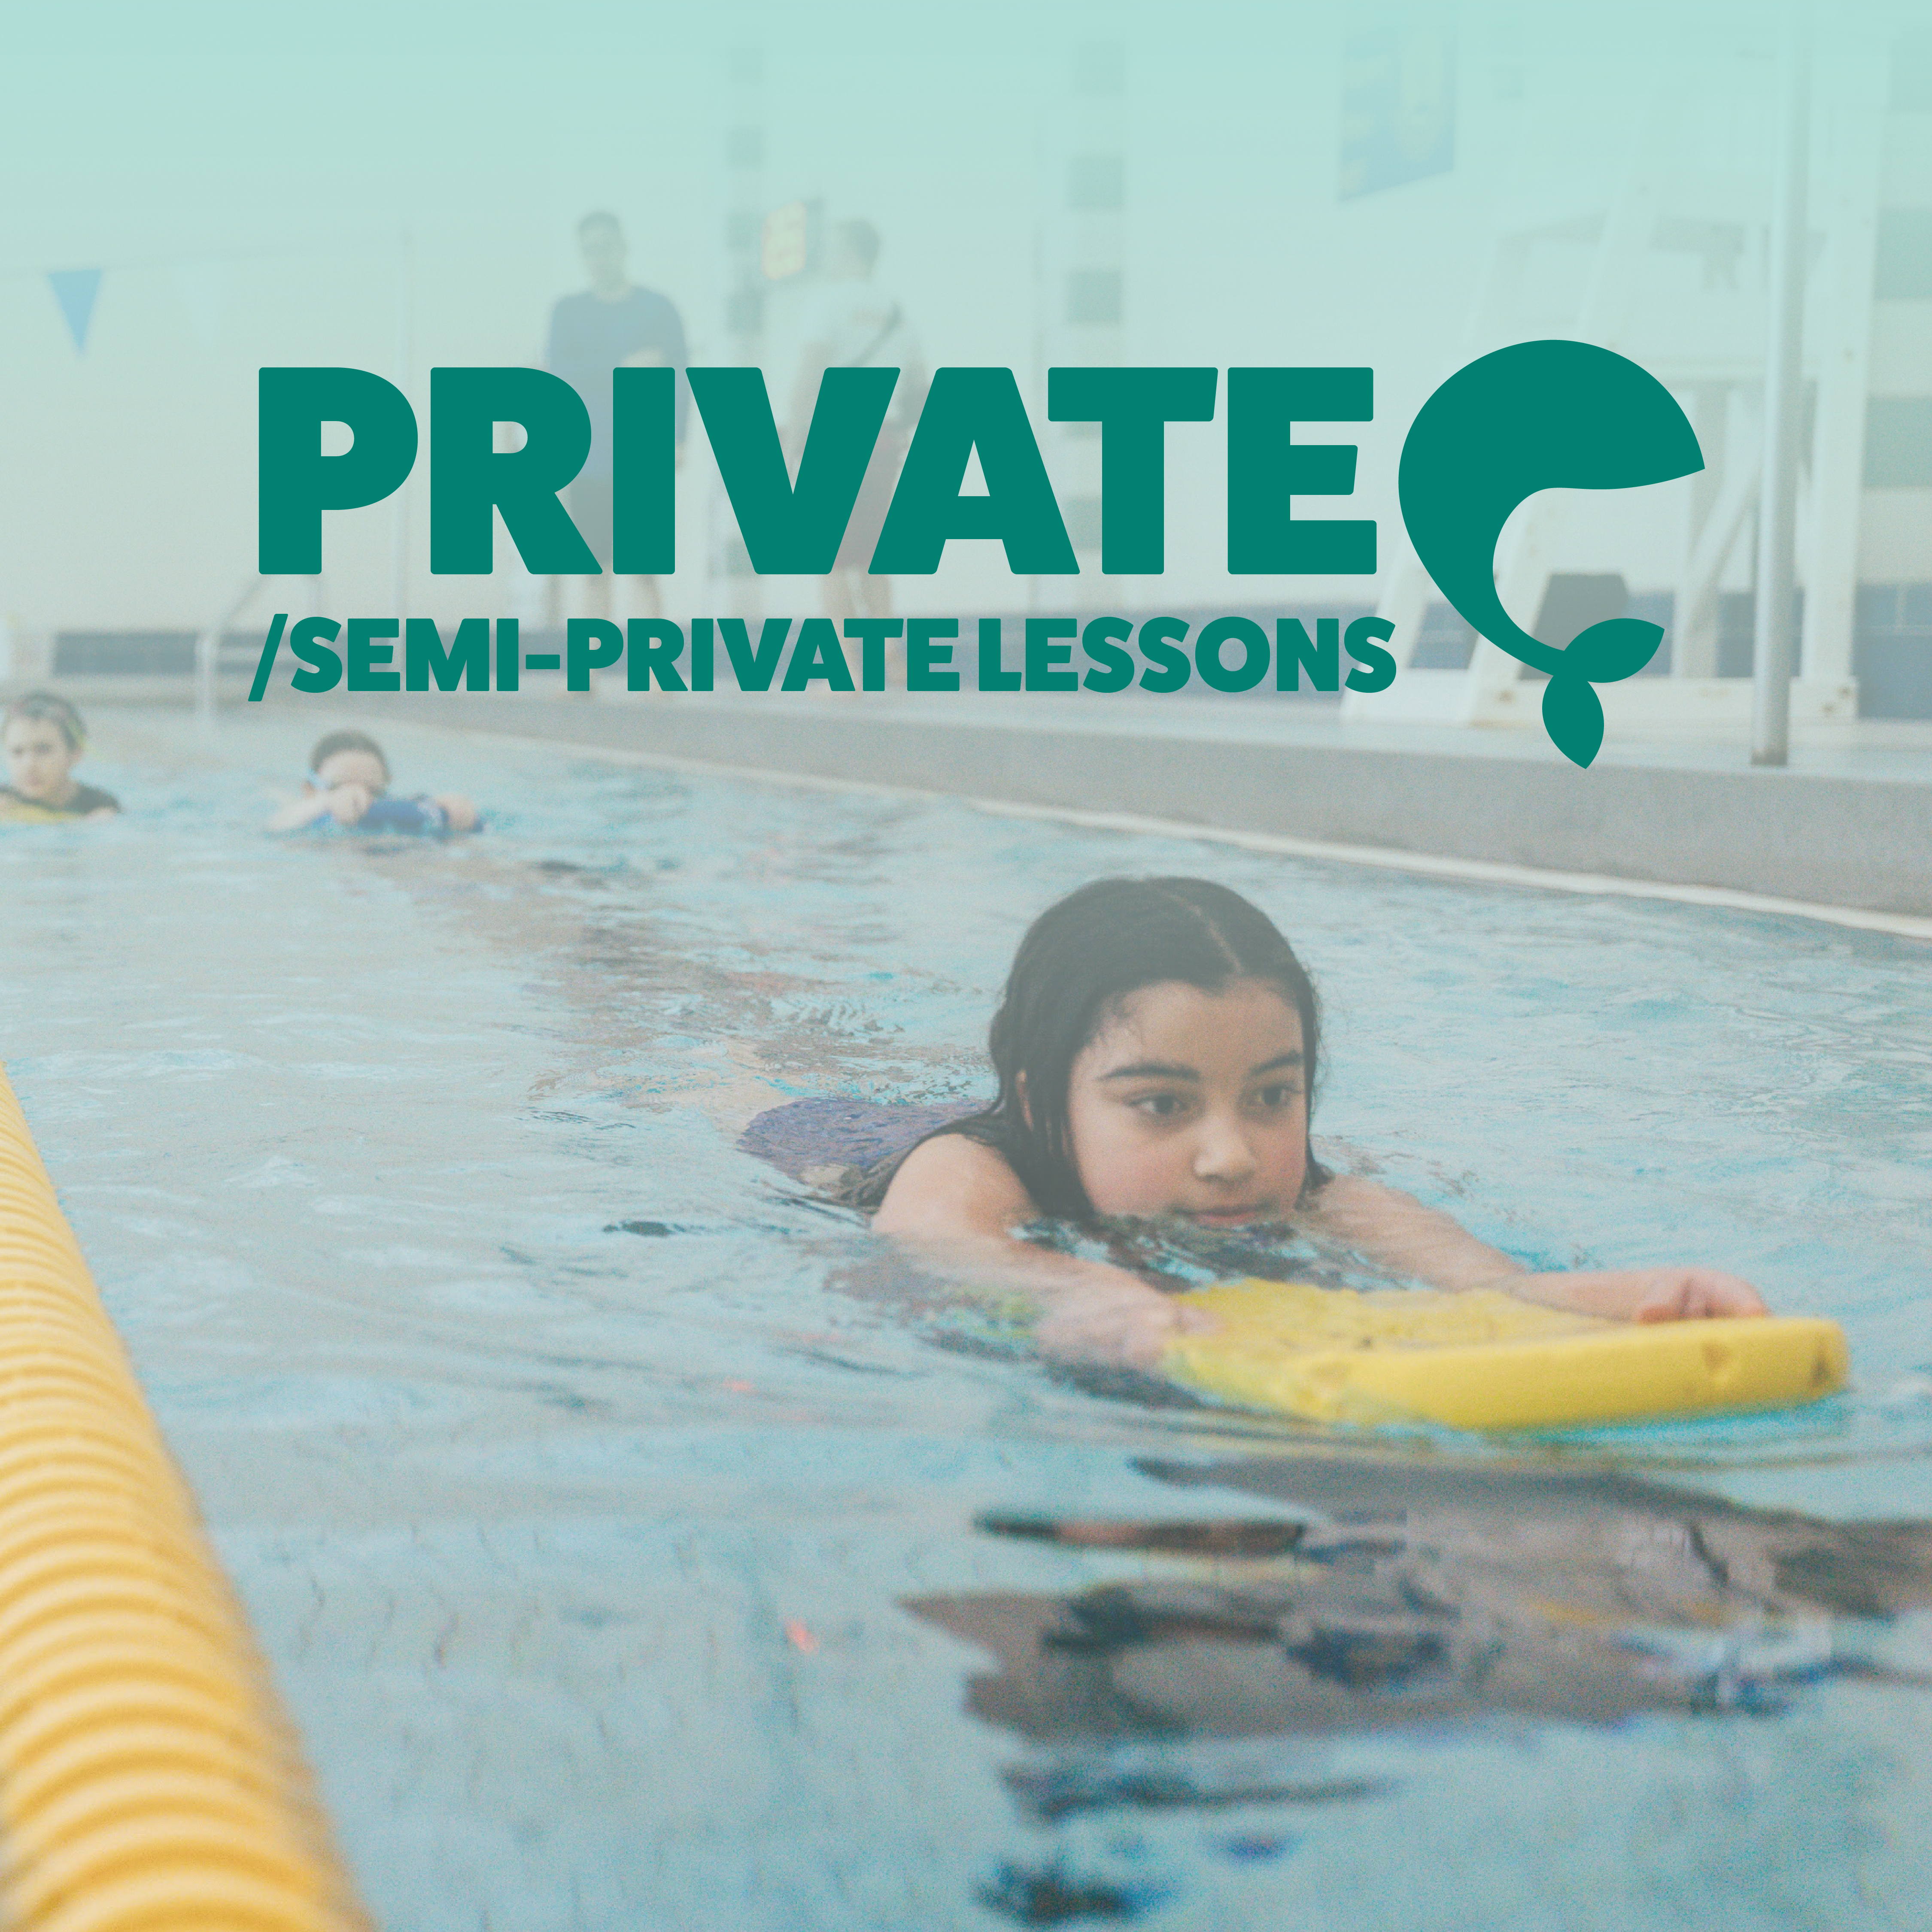 Swimming student using floating with text "Private/Semi-Private Lessons"